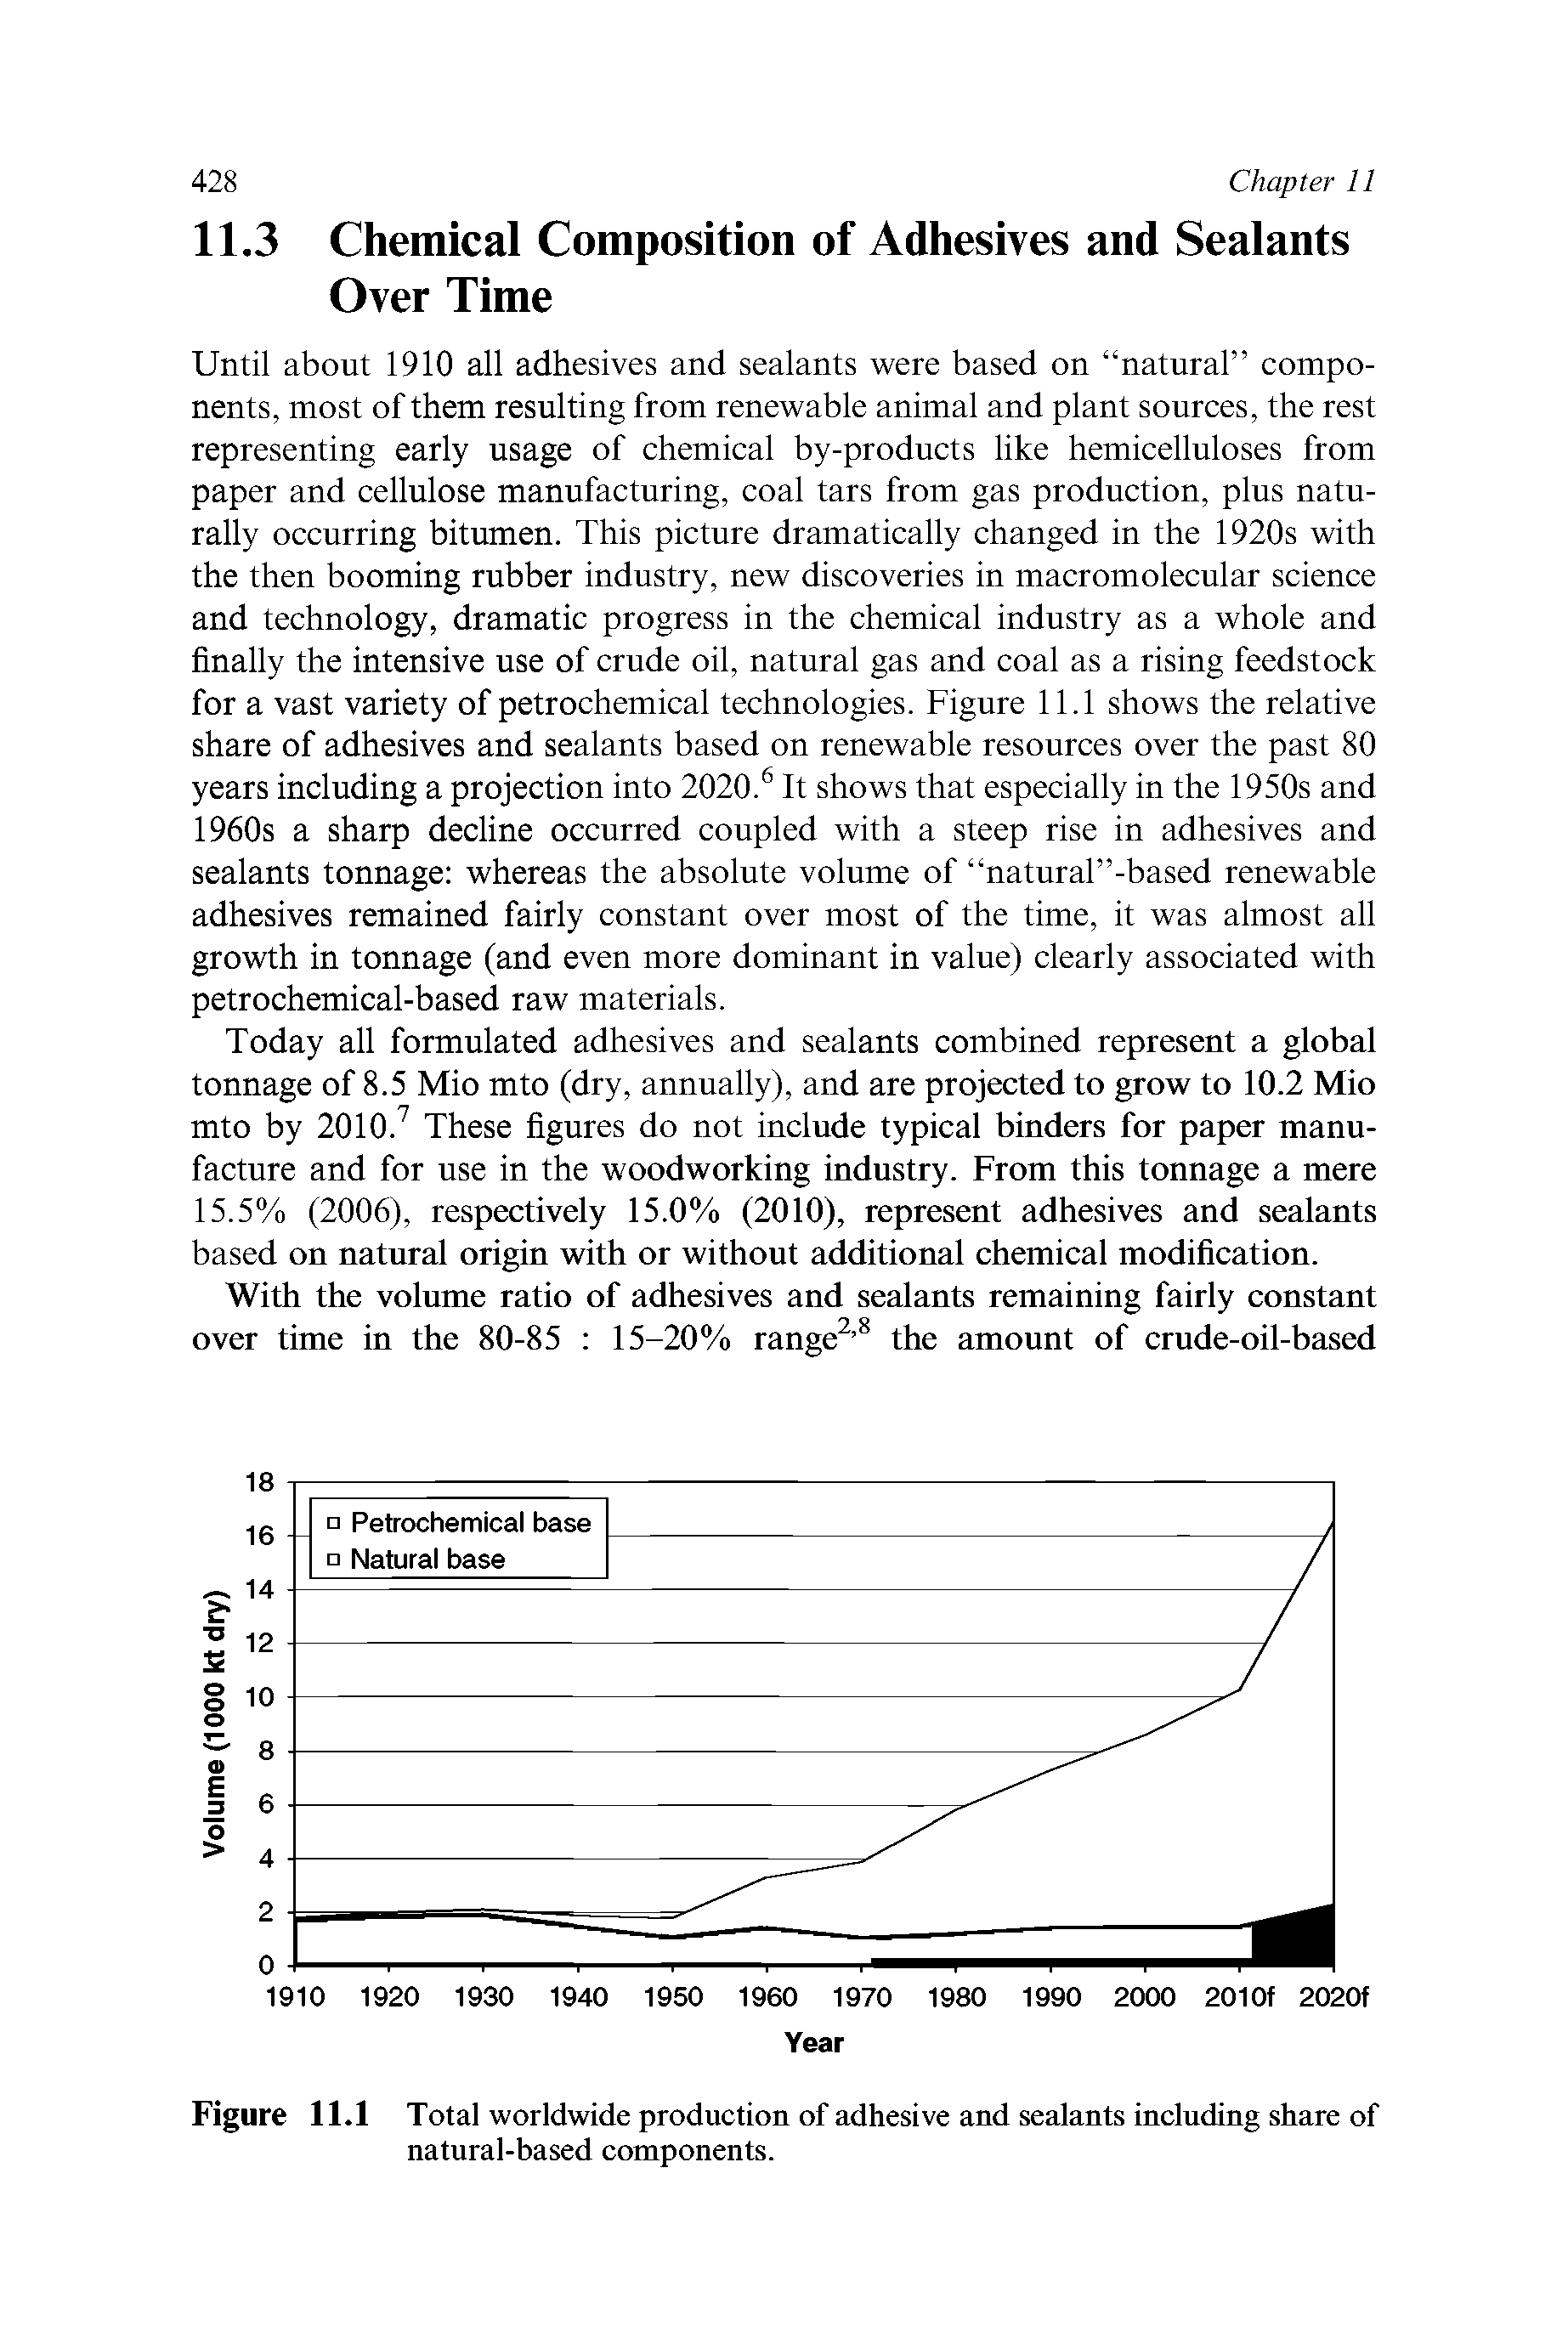 Figure 11.1 Total worldwide production of adhesive and sealants including share of natural-based components.